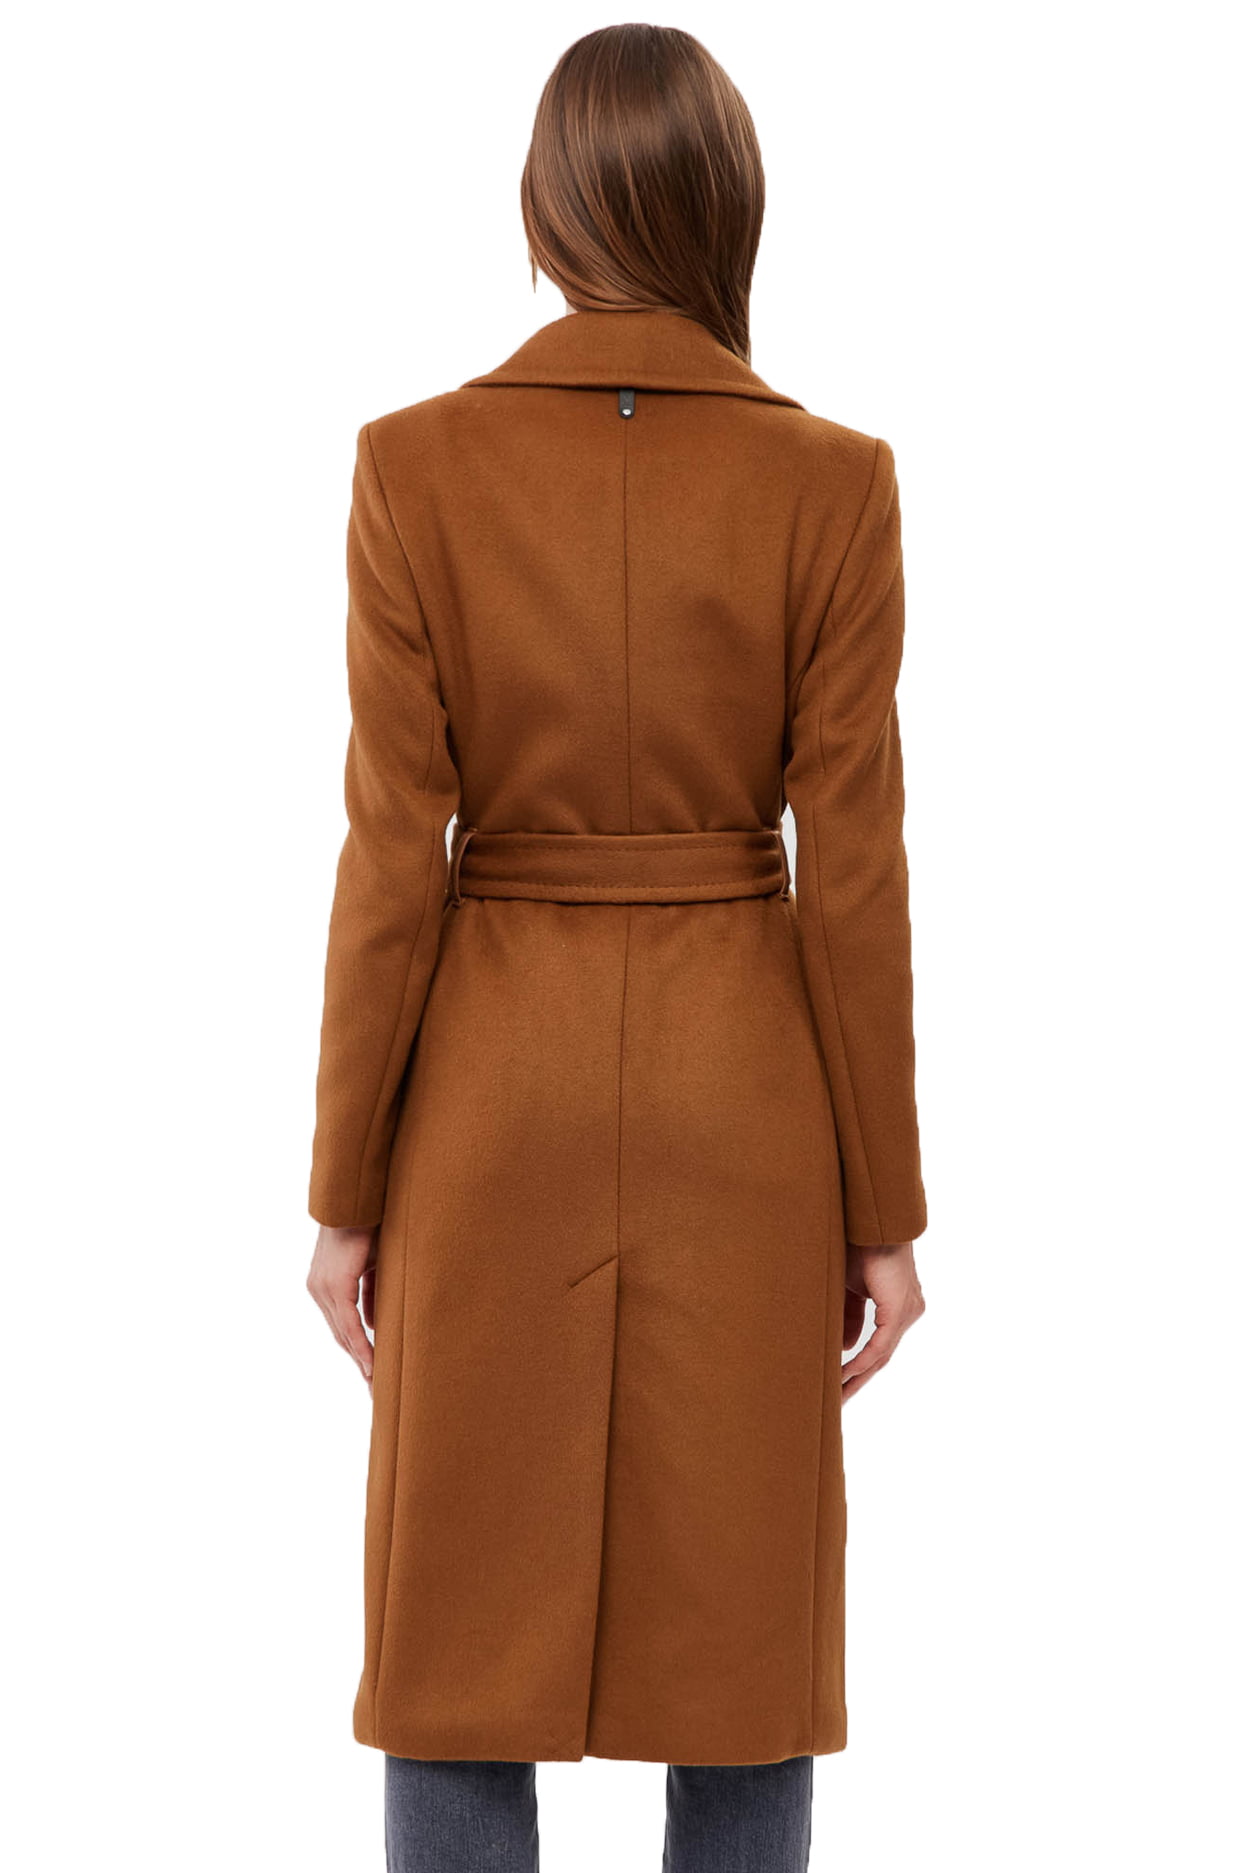 www.couturepoint.com-mackage-womens-brown-wool-cashmere-sienna-tailored-double-breasted-coat